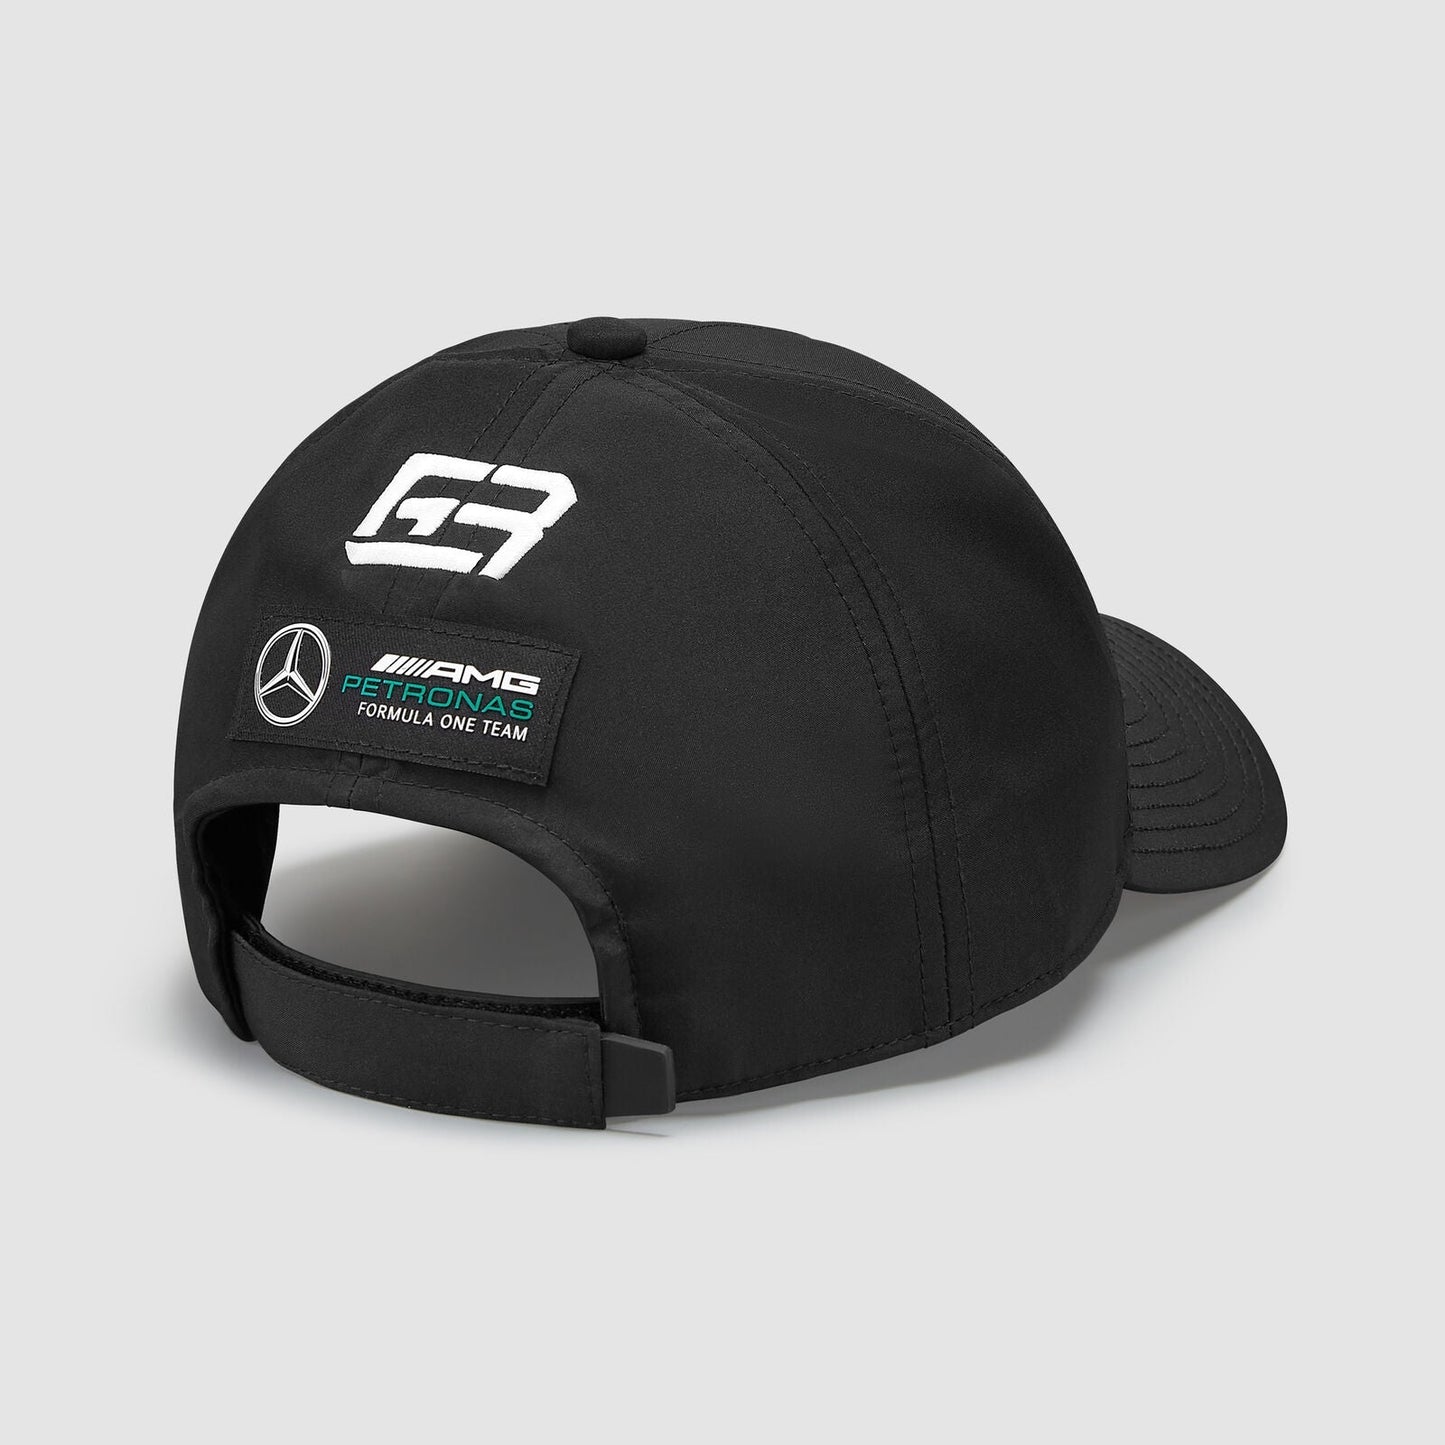 AMG 55 Years - George Special Edition Cap